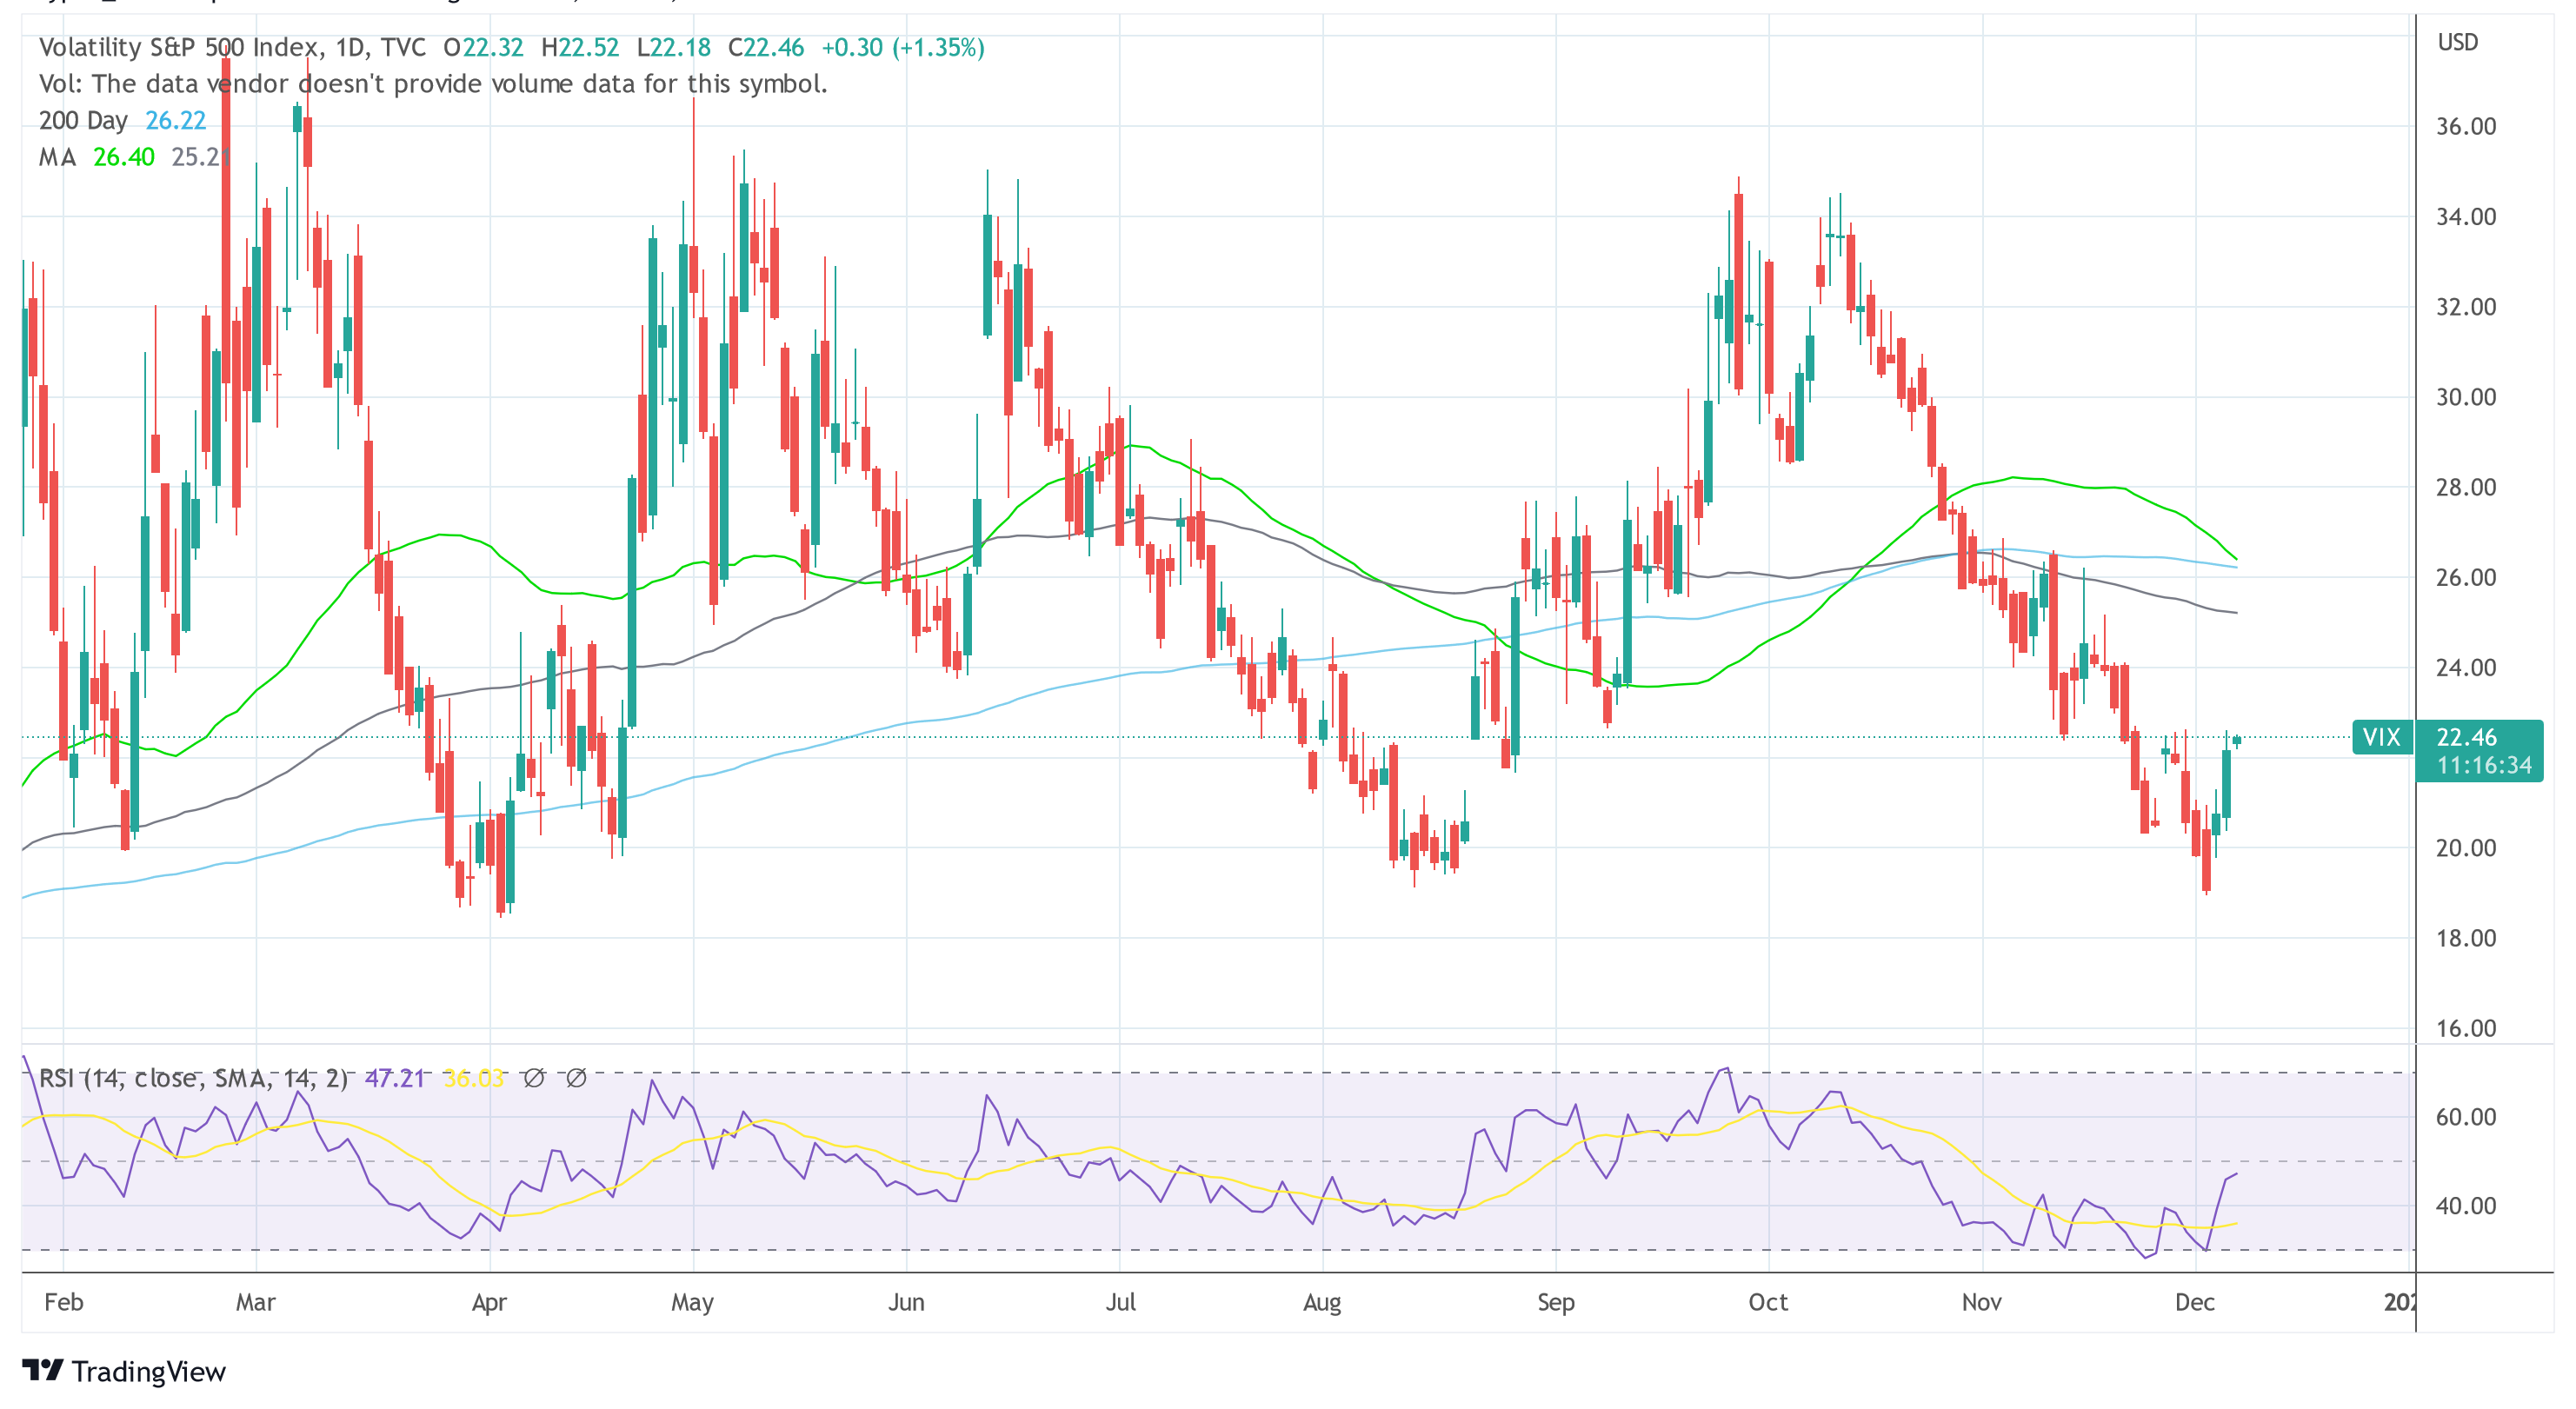 Upswing Of VIX Alerts Doom For Bitcoin; Friday Will Be Essential